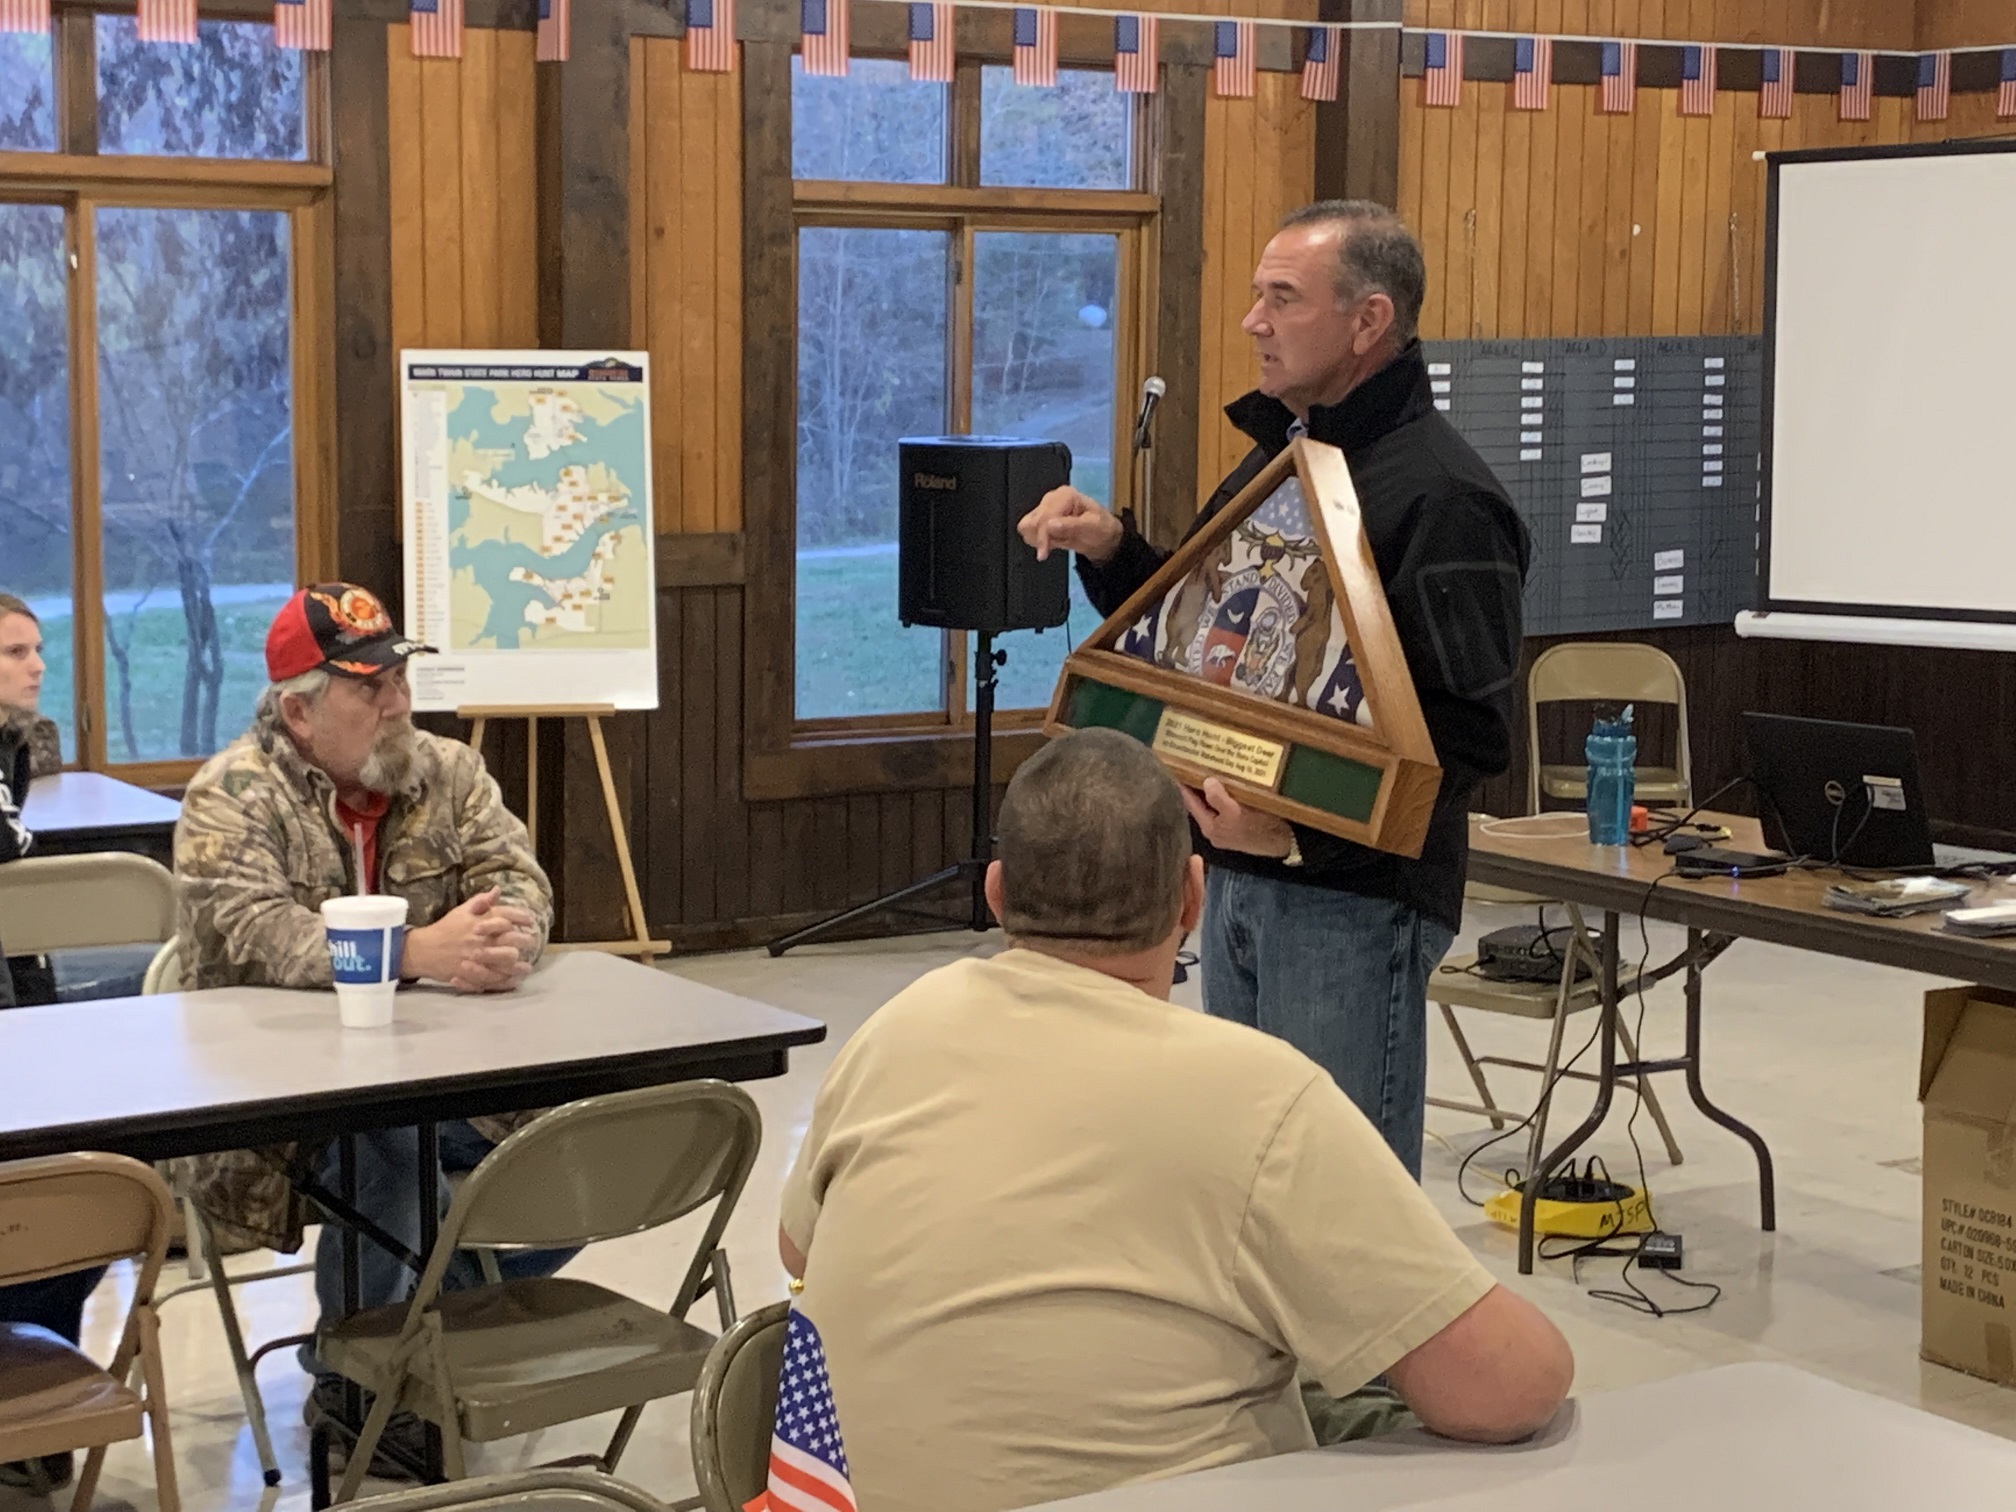 Lt. Gov. Mike Kehoe holds and discusses the Biggest Buck Award, a triangular award with image from the Missouri flag, to be presented after the hunt.